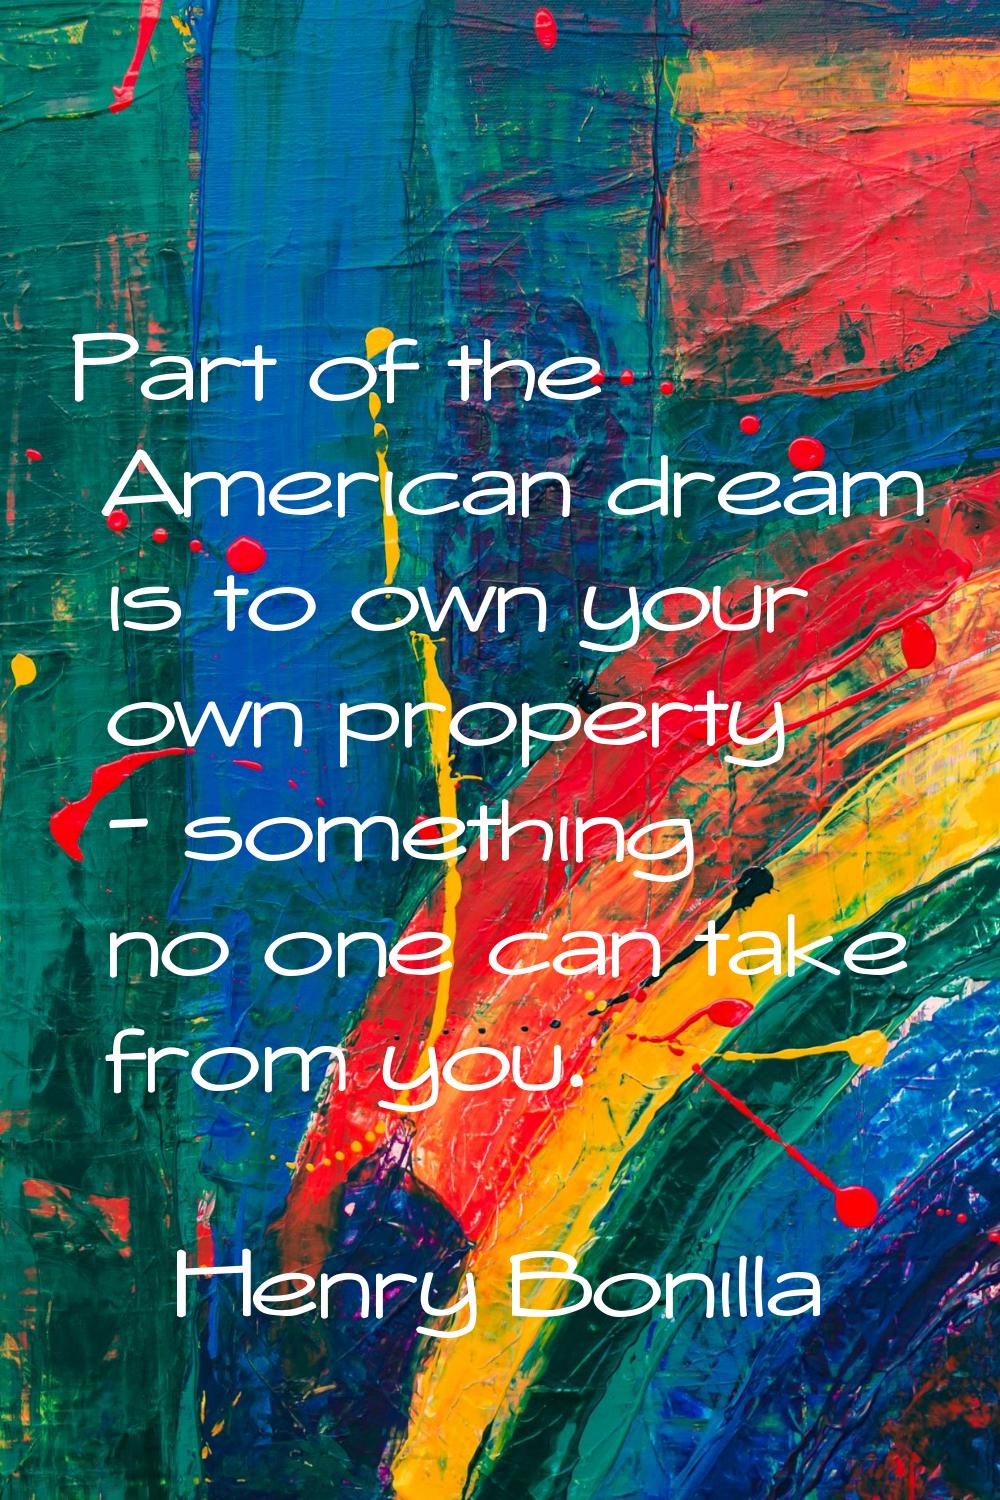 Part of the American dream is to own your own property - something no one can take from you.